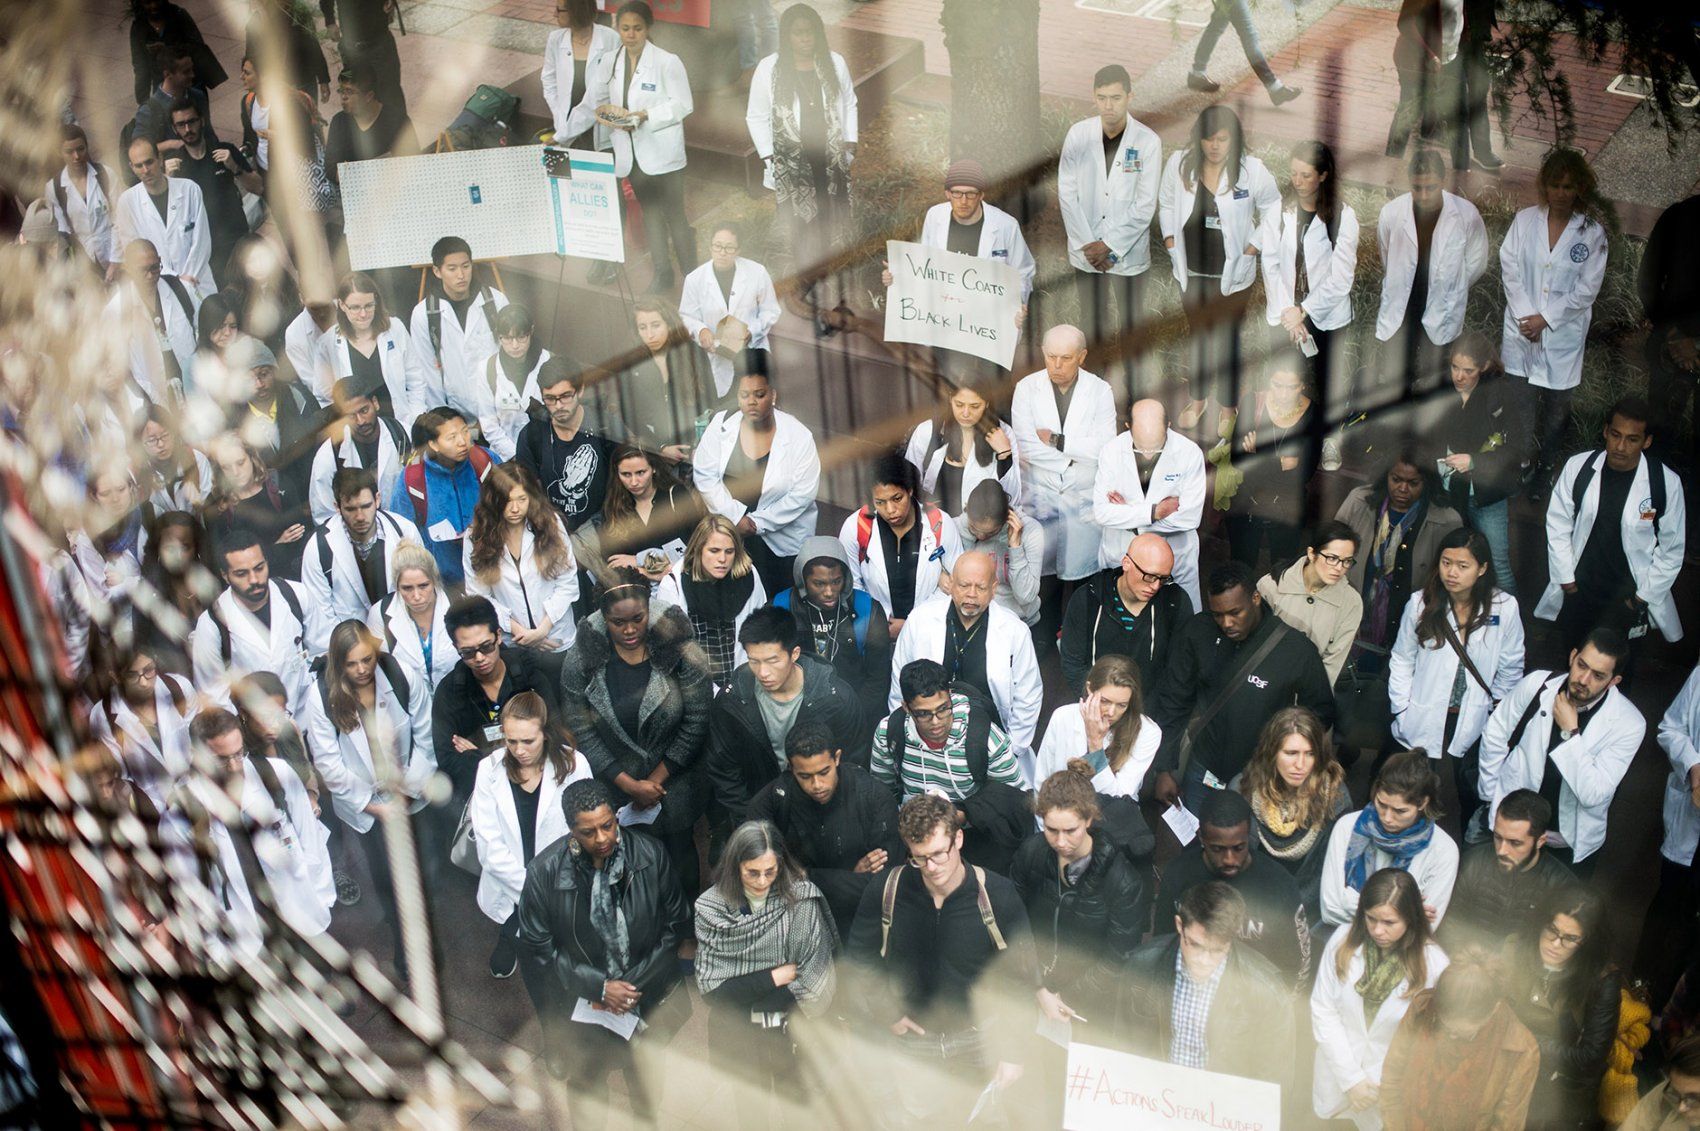 2015 White Coats 4 Black Lives rally crowd seen from library